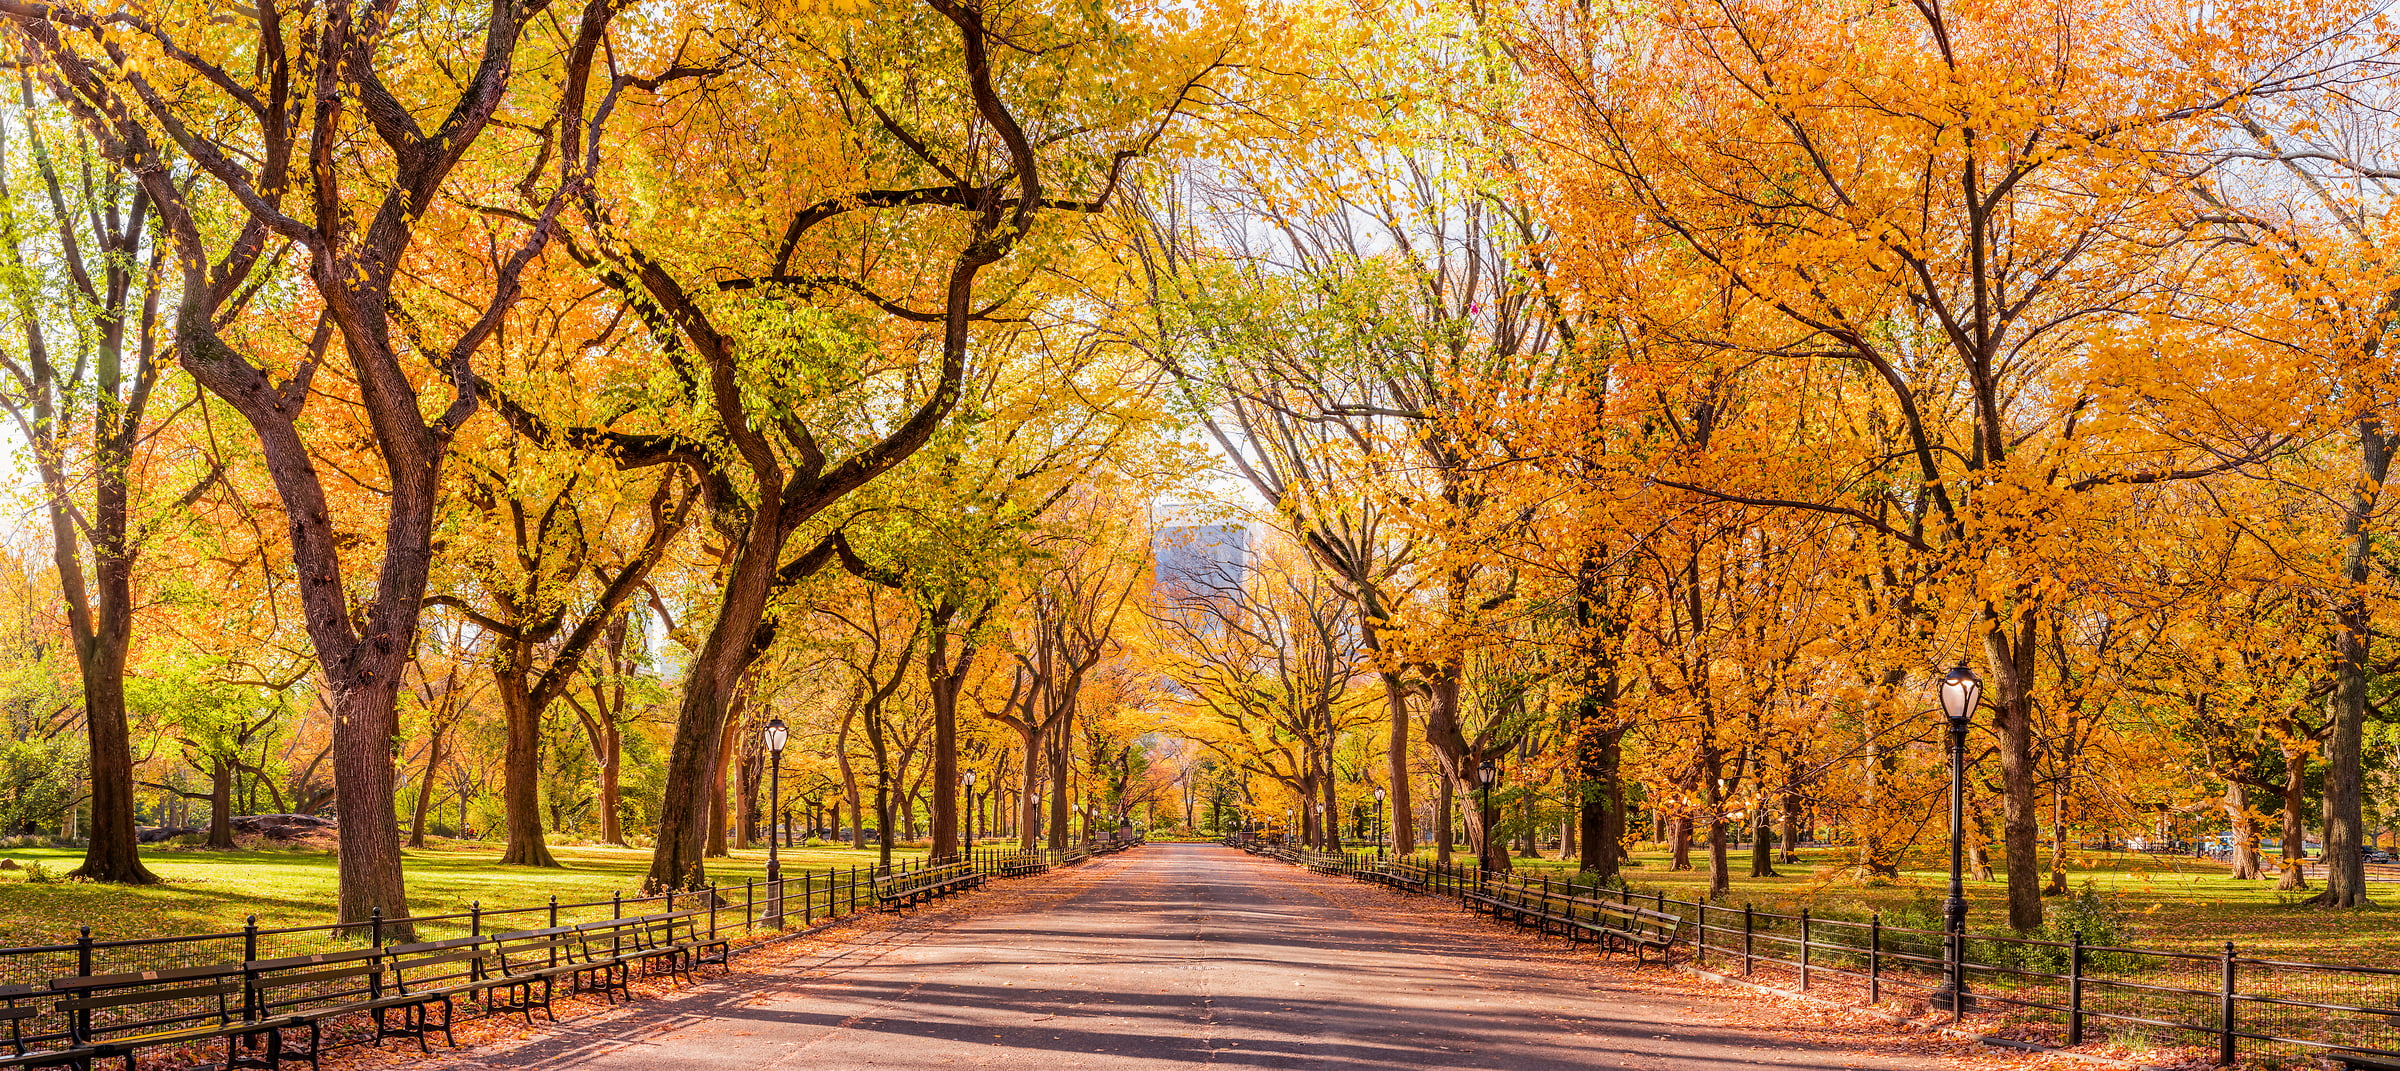 1,754 megapixels! A very high definition VAST photo of autumn trees on the Mall in Central Park in New York City at sunrise; created by Dan Piech.